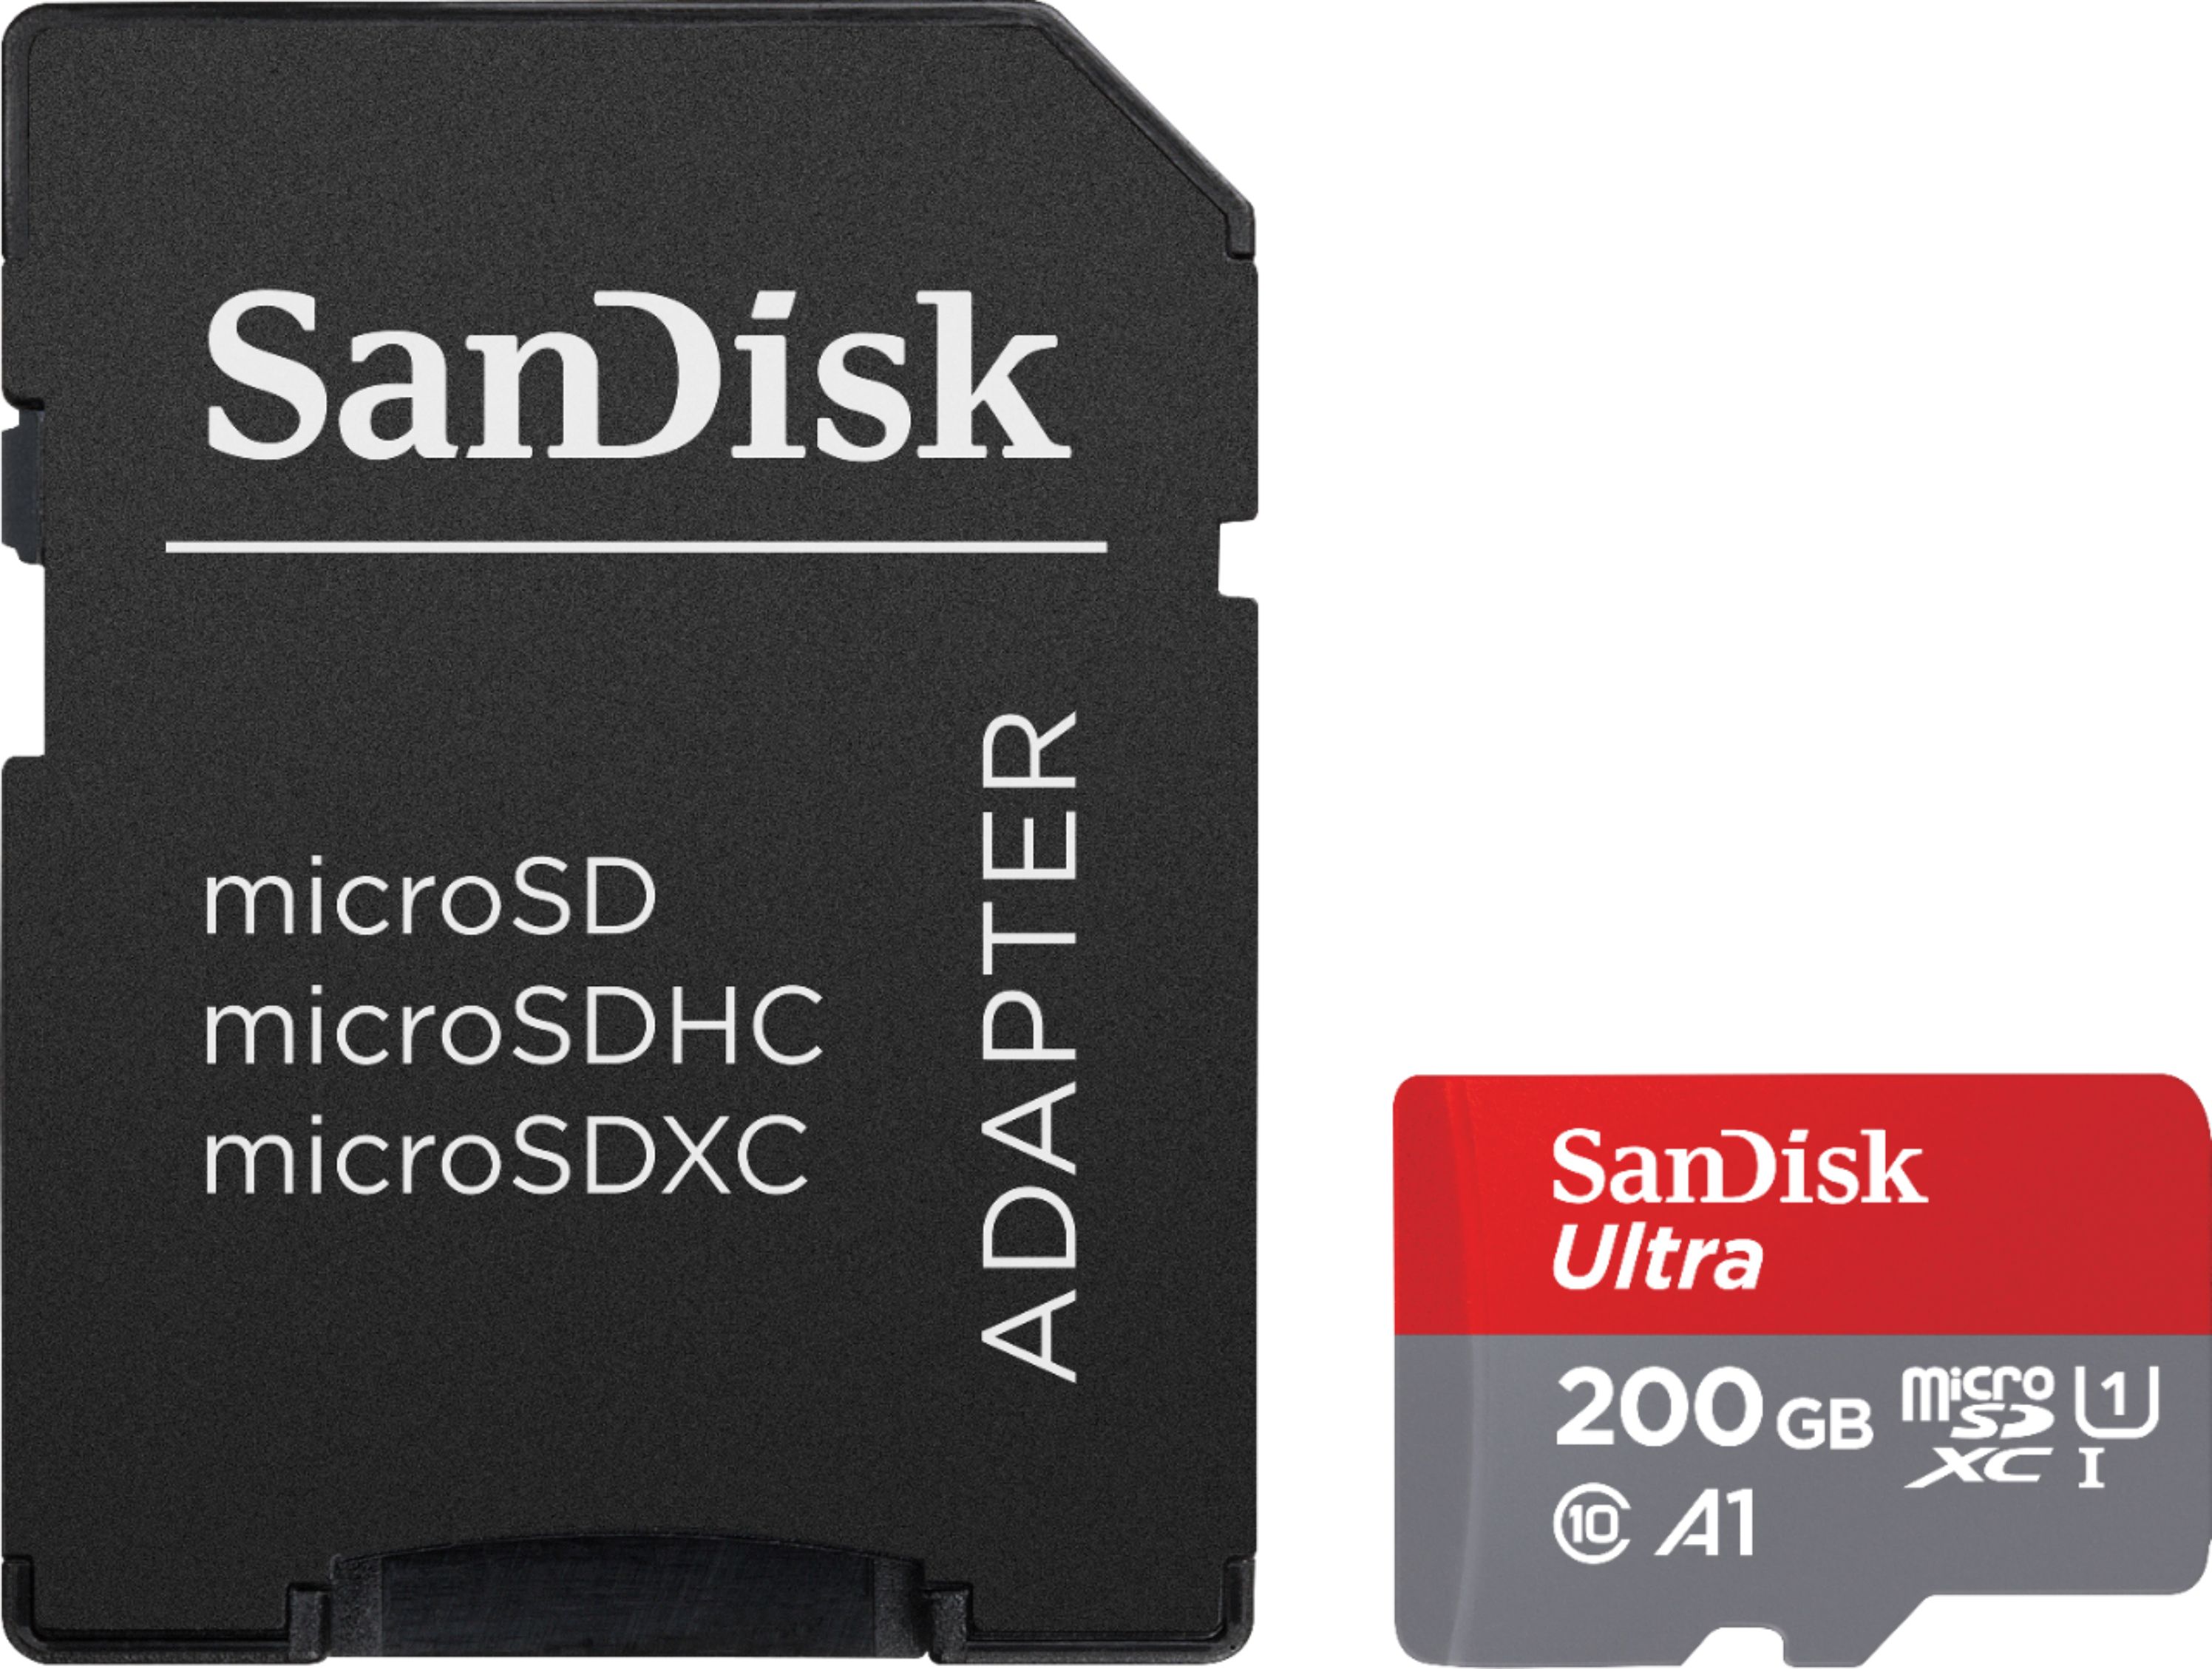 100MBs A1 U1 C10 Works with SanDisk SanDisk Ultra 200GB MicroSDXC Verified for Gionee W909 by SanFlash 